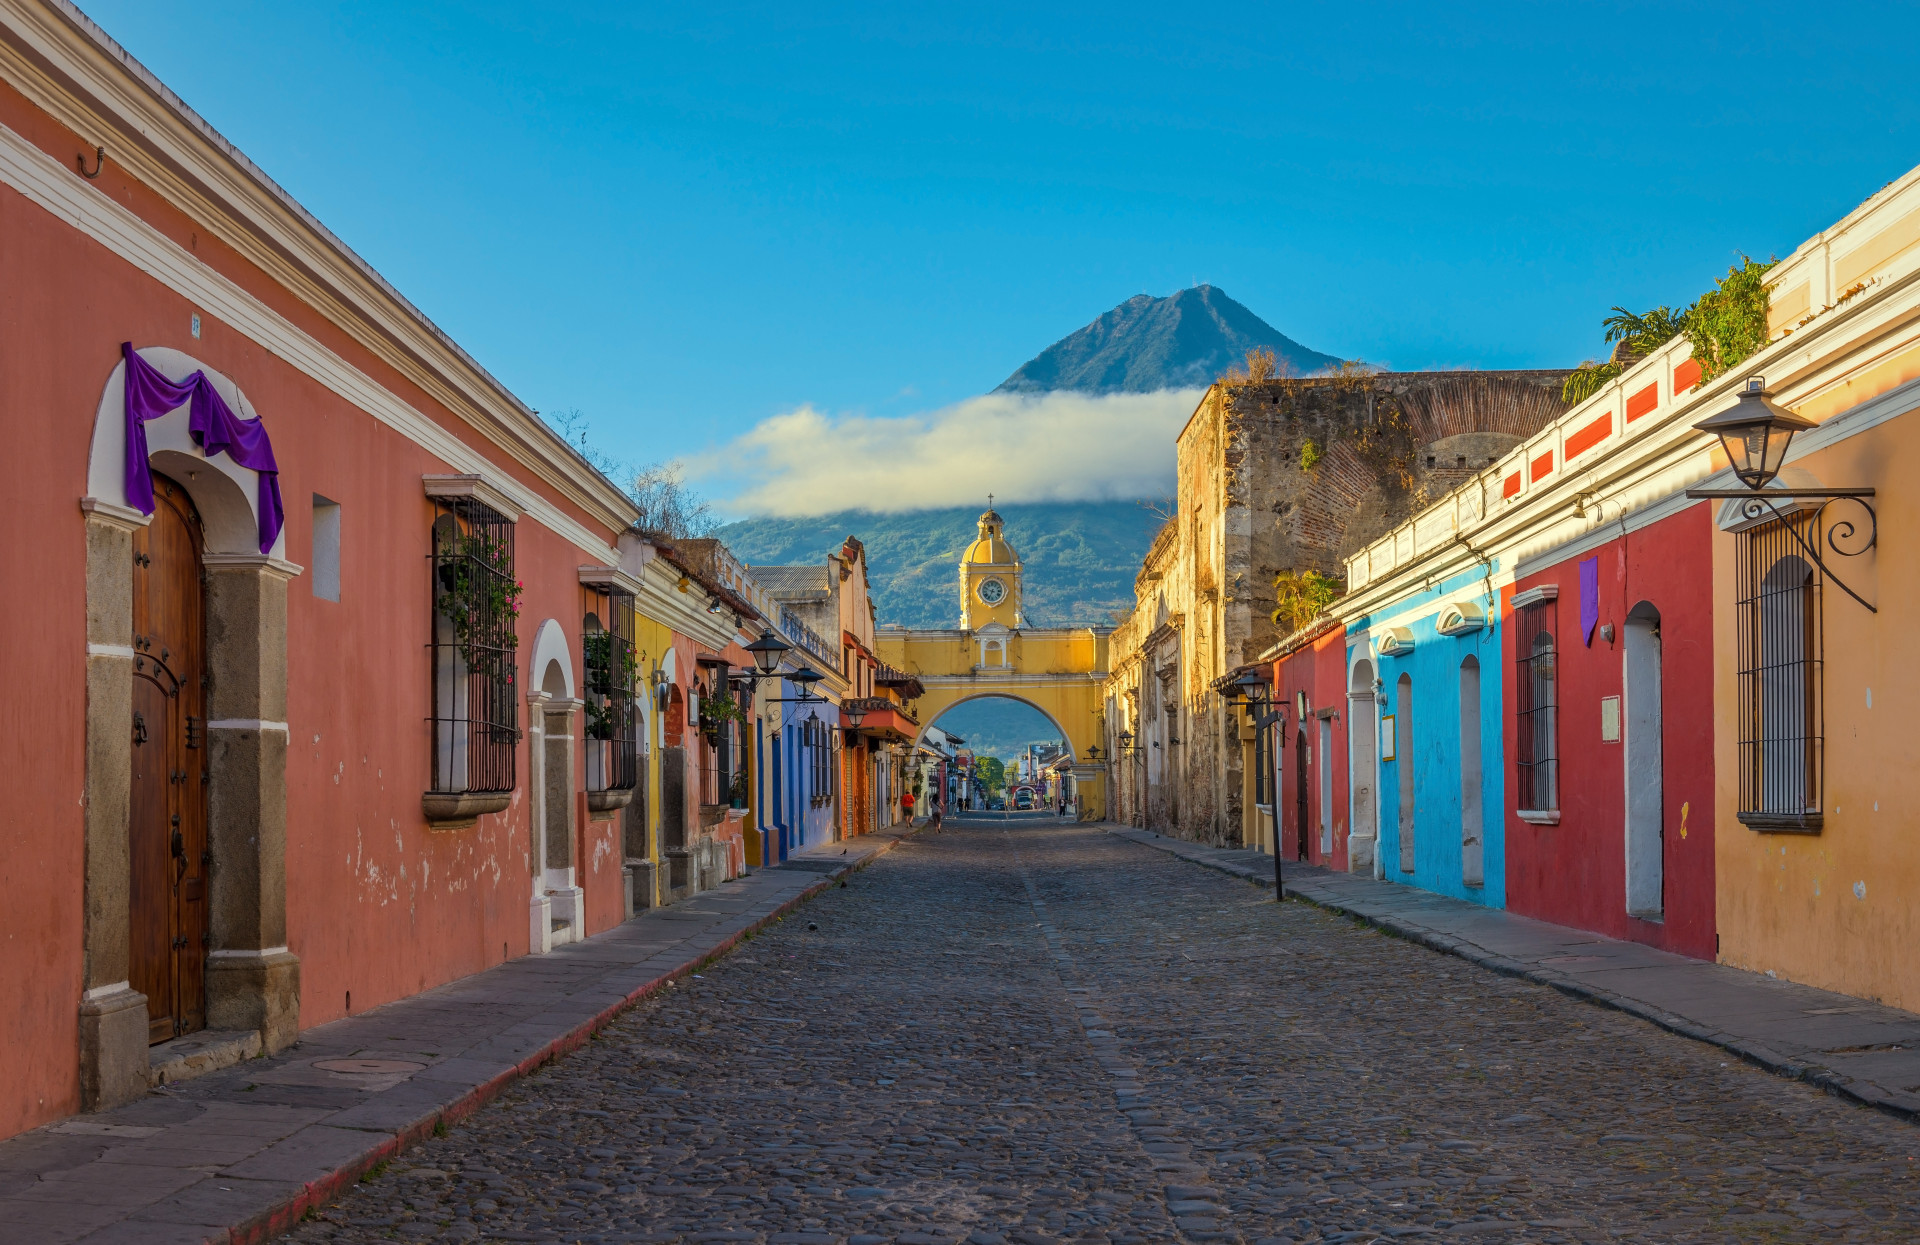 This Guatemalan city is known for being surrounded by volcanoes and for its architecture rich in baroque features.